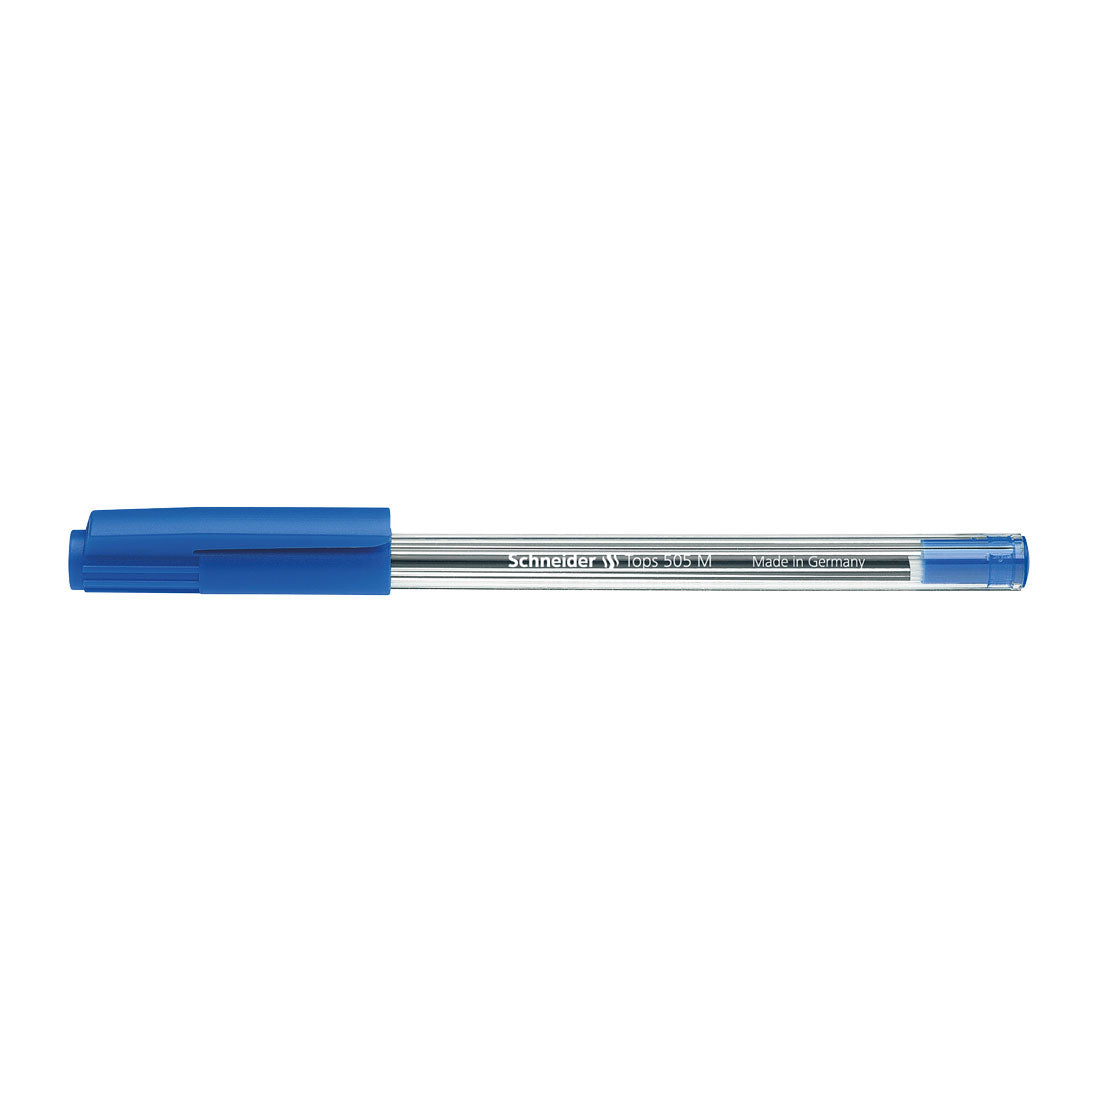 Tops 505 Ballpoint Pens M, Box of 10 units#ink-color_ blue